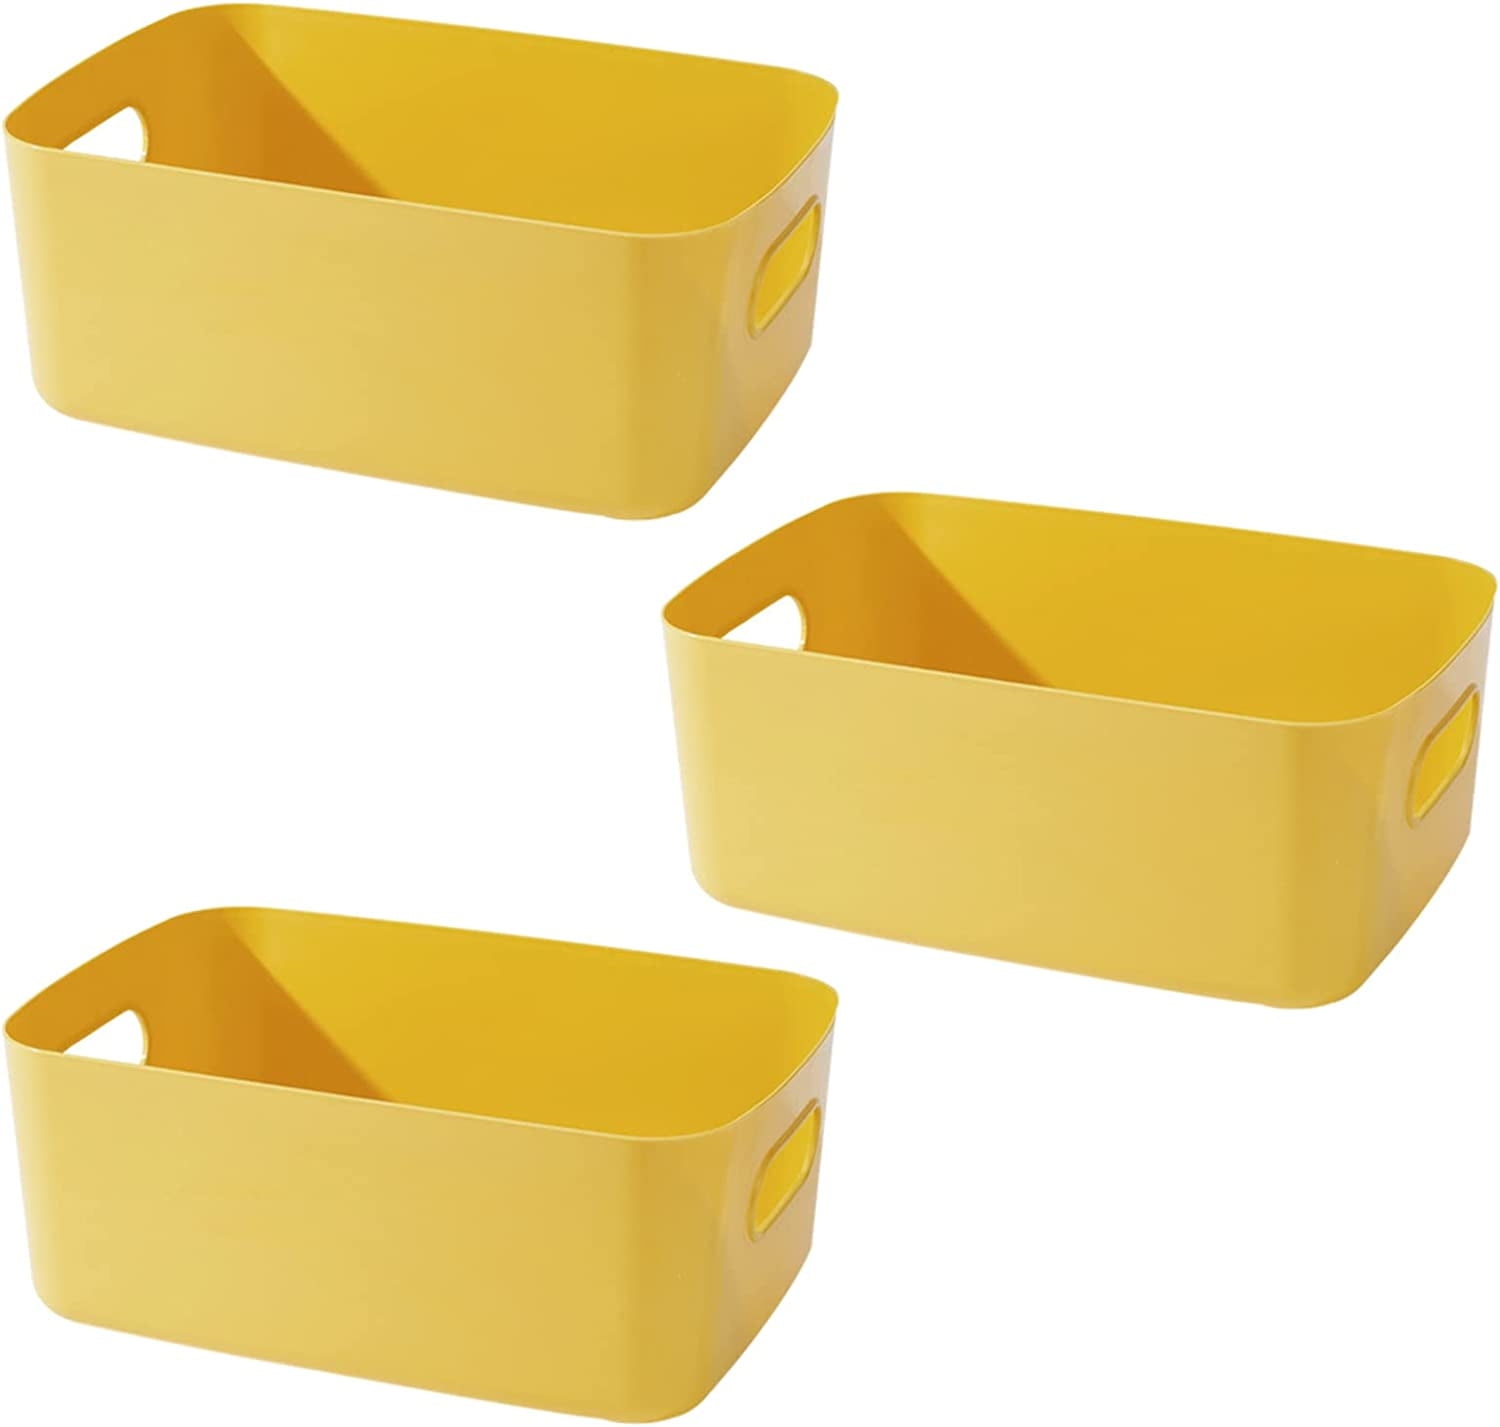 Yellow stacking boxes: Plastic boxes